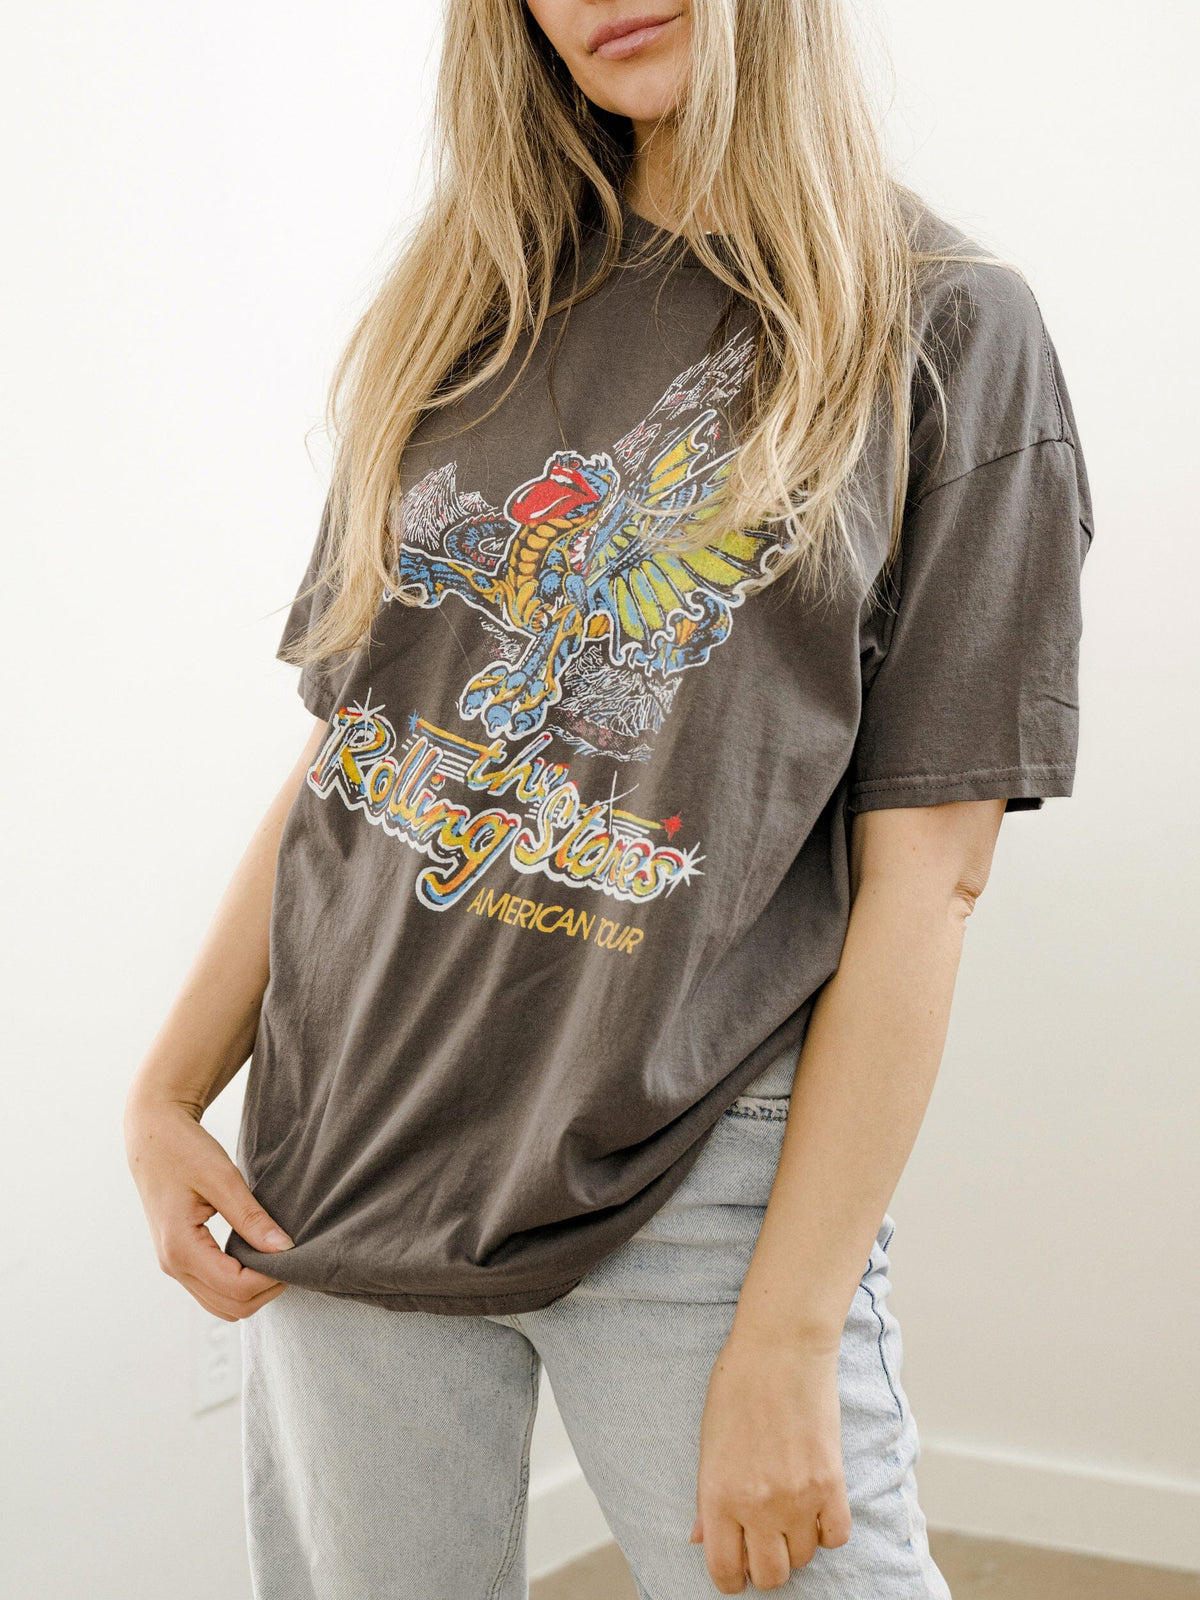 Rolling Stones American Dragon Tour Charcoal Thrifted Distressed Tee